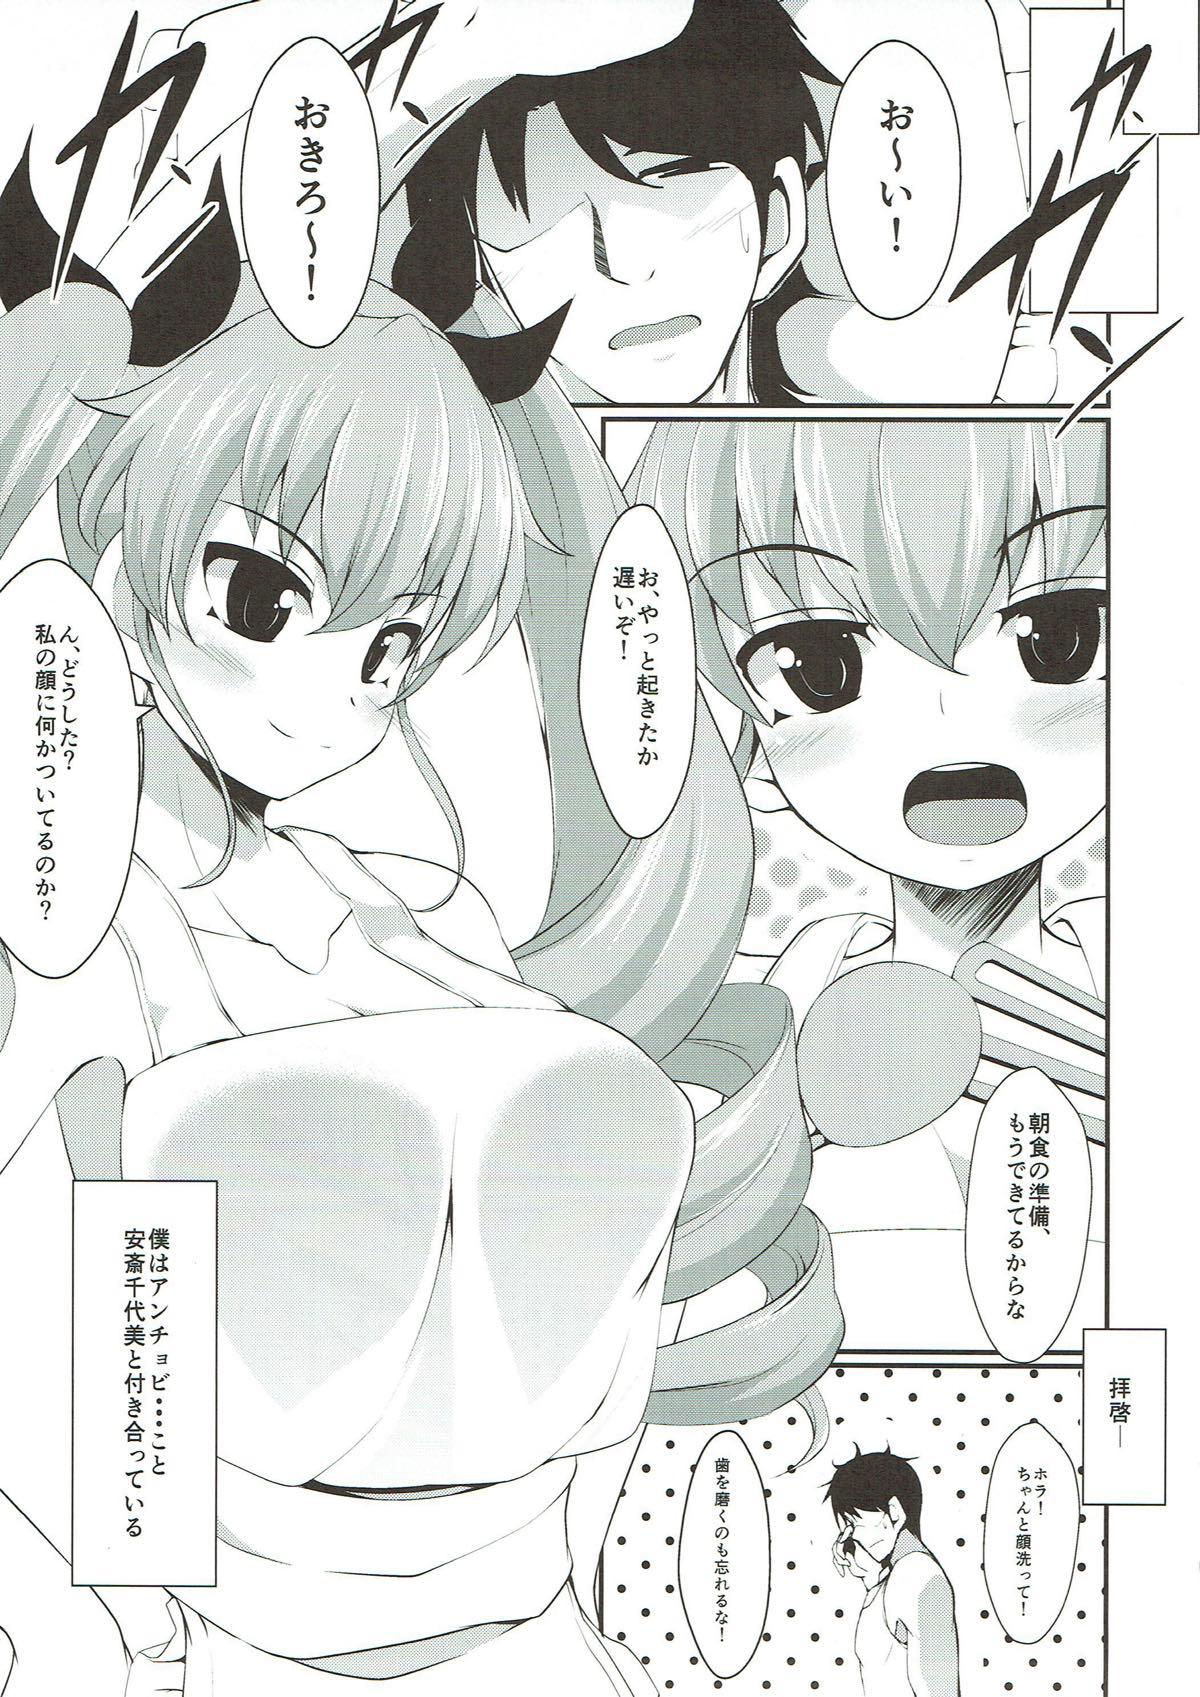 Tiny Tits Koibito Duce - Girls und panzer Real Orgasm - Page 3